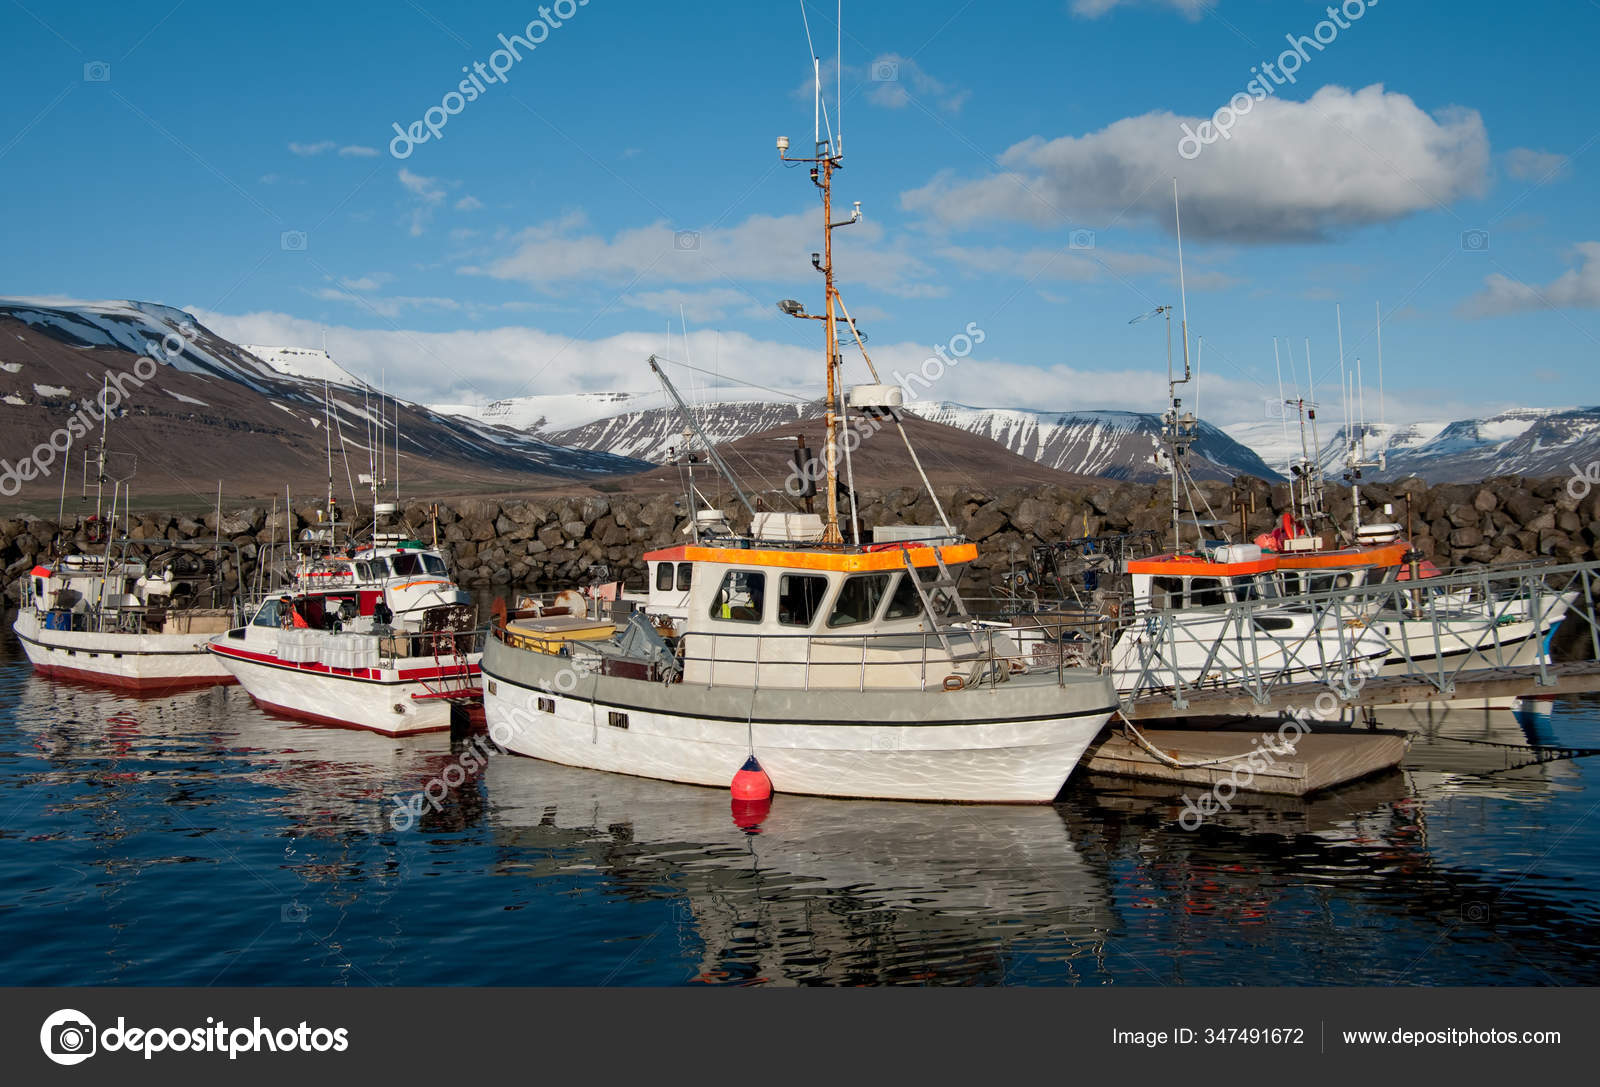 Icelandic Fishing Boats Commercial Fishing Boats Gather Small Harbor  Western Stock Photo by ©wakr10 347491672